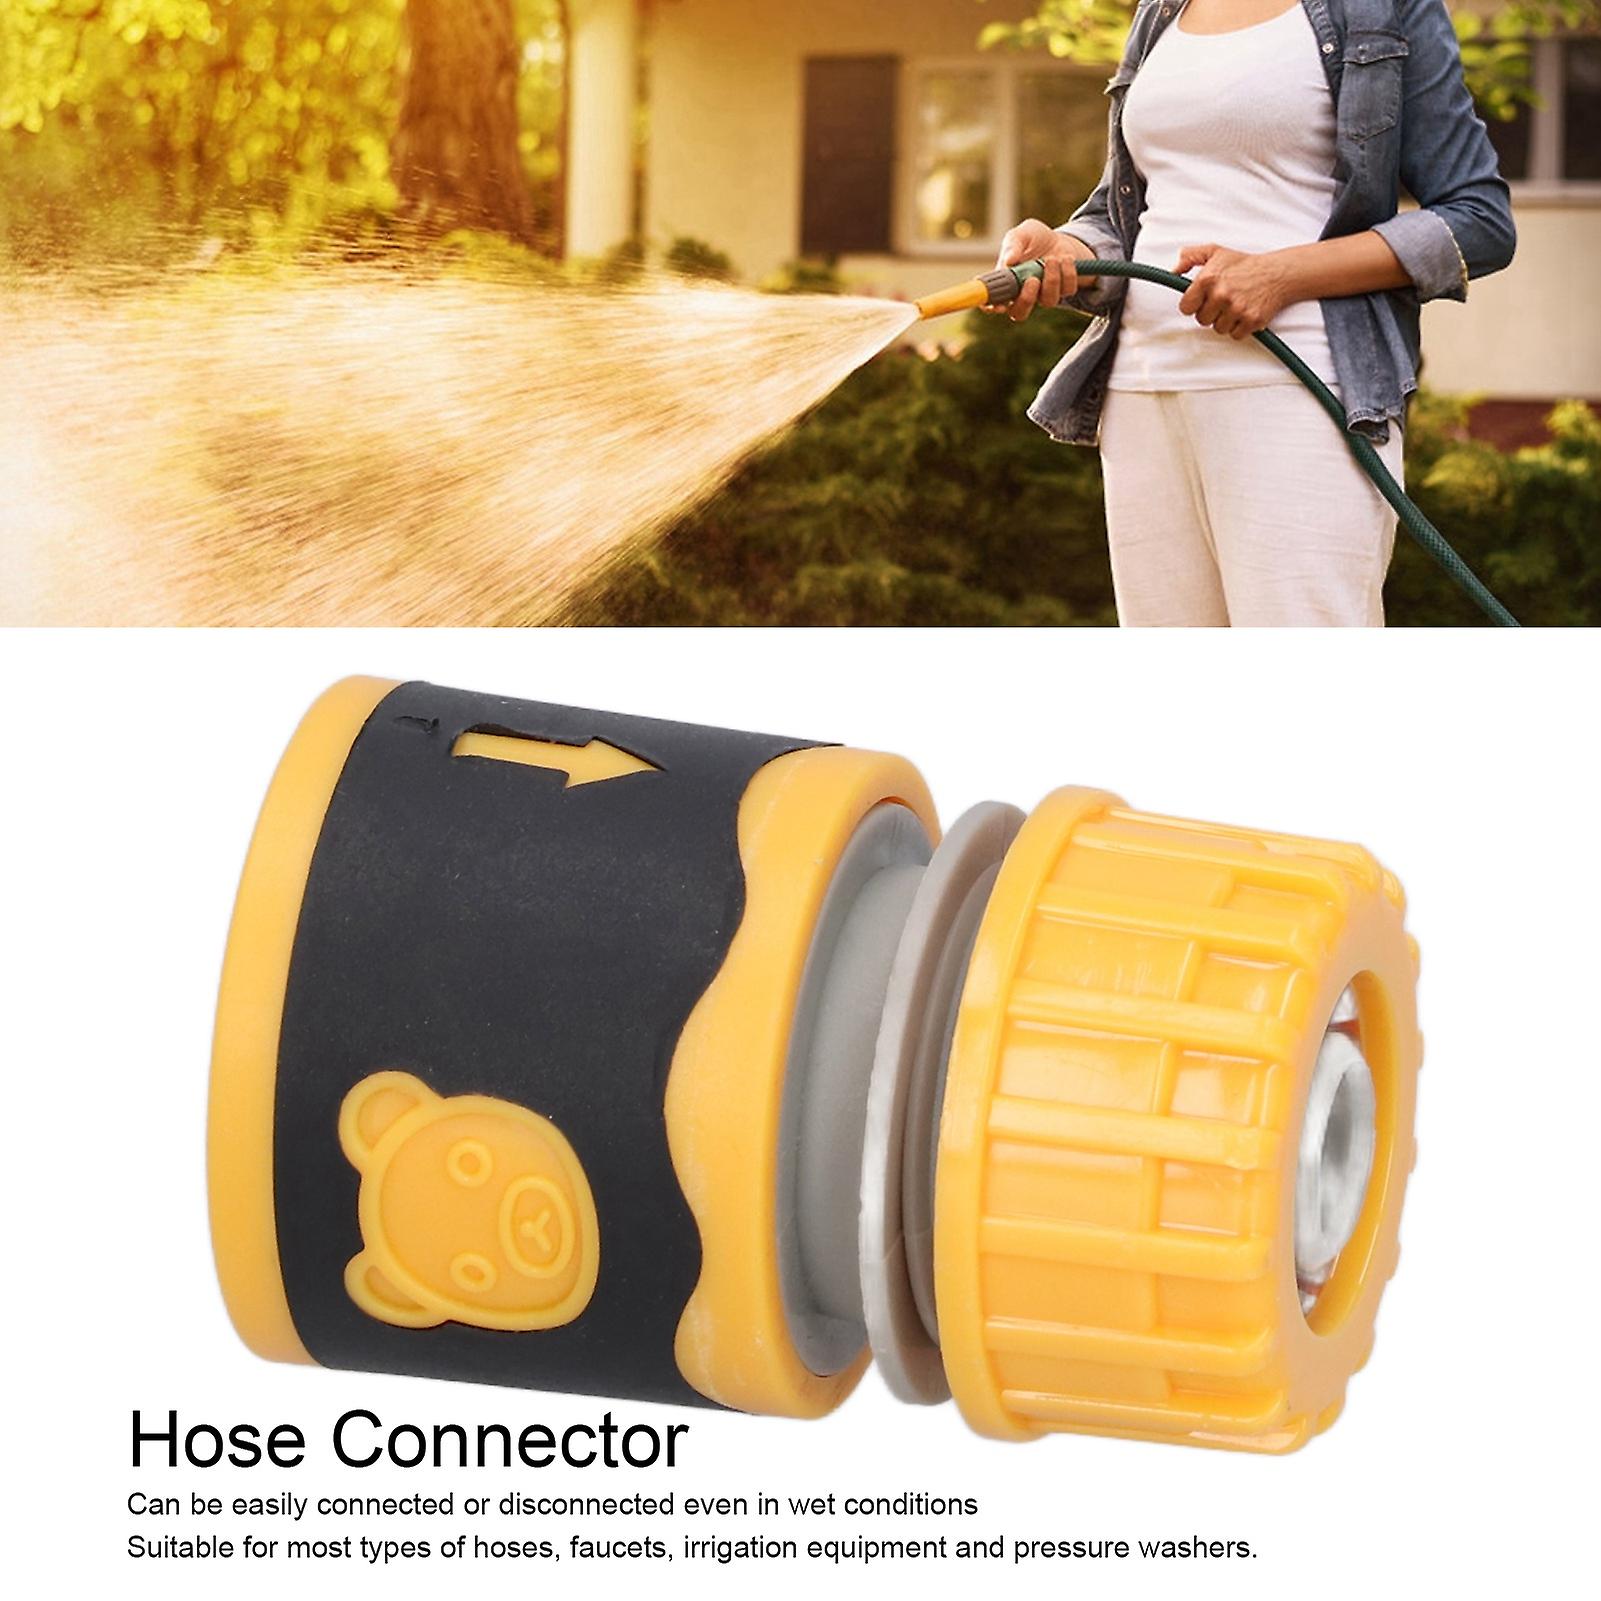 10 Pcs Garden Hose Quick Connector， Plastic Water Hose Quick Connect Fittings 1/2 Inch Male And Female Quick Release Kit